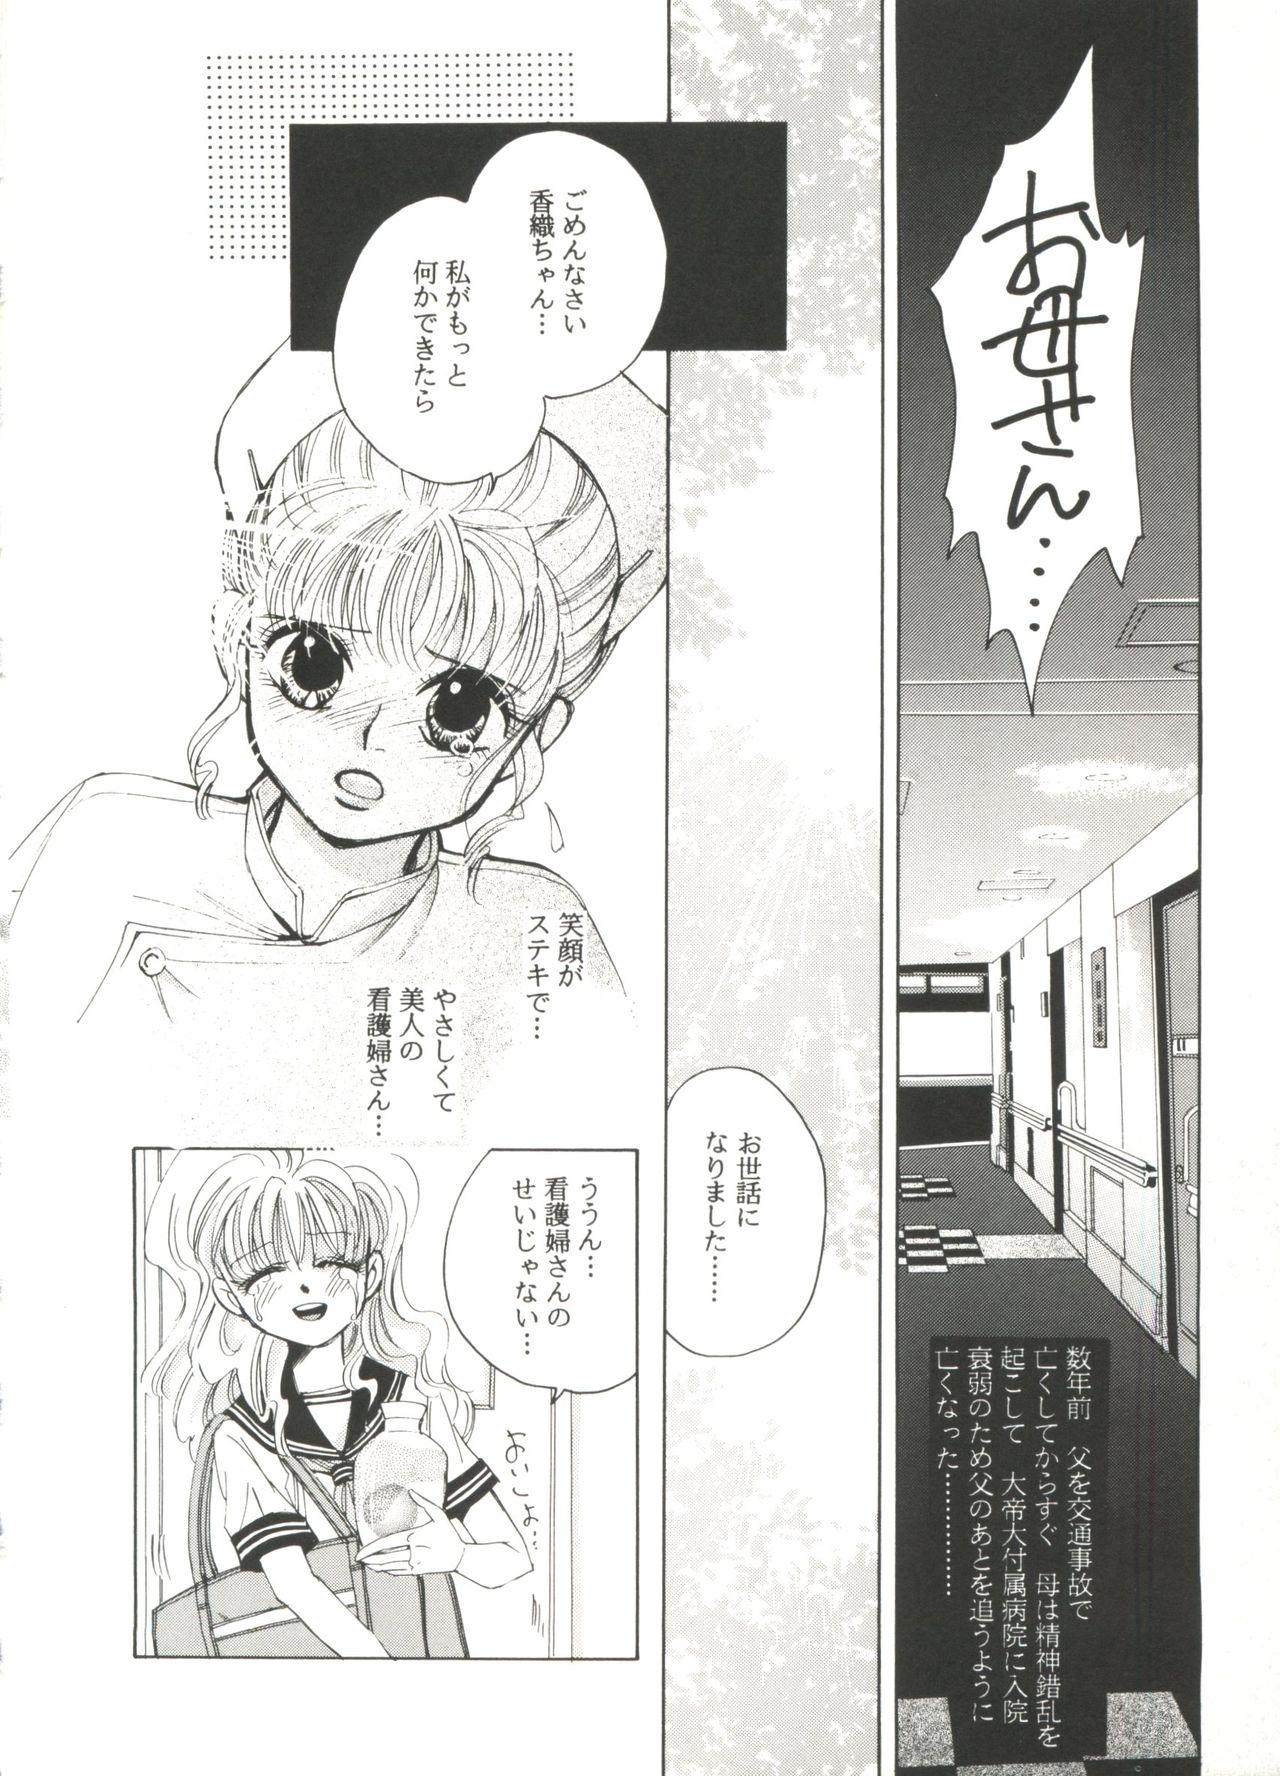 Amateur Xxx Doujin Anthology Bishoujo a La Carte 8 - Sailor moon King of fighters Magic knight rayearth Battle athletes Saber marionette Kodomo no omocha Red - Page 8